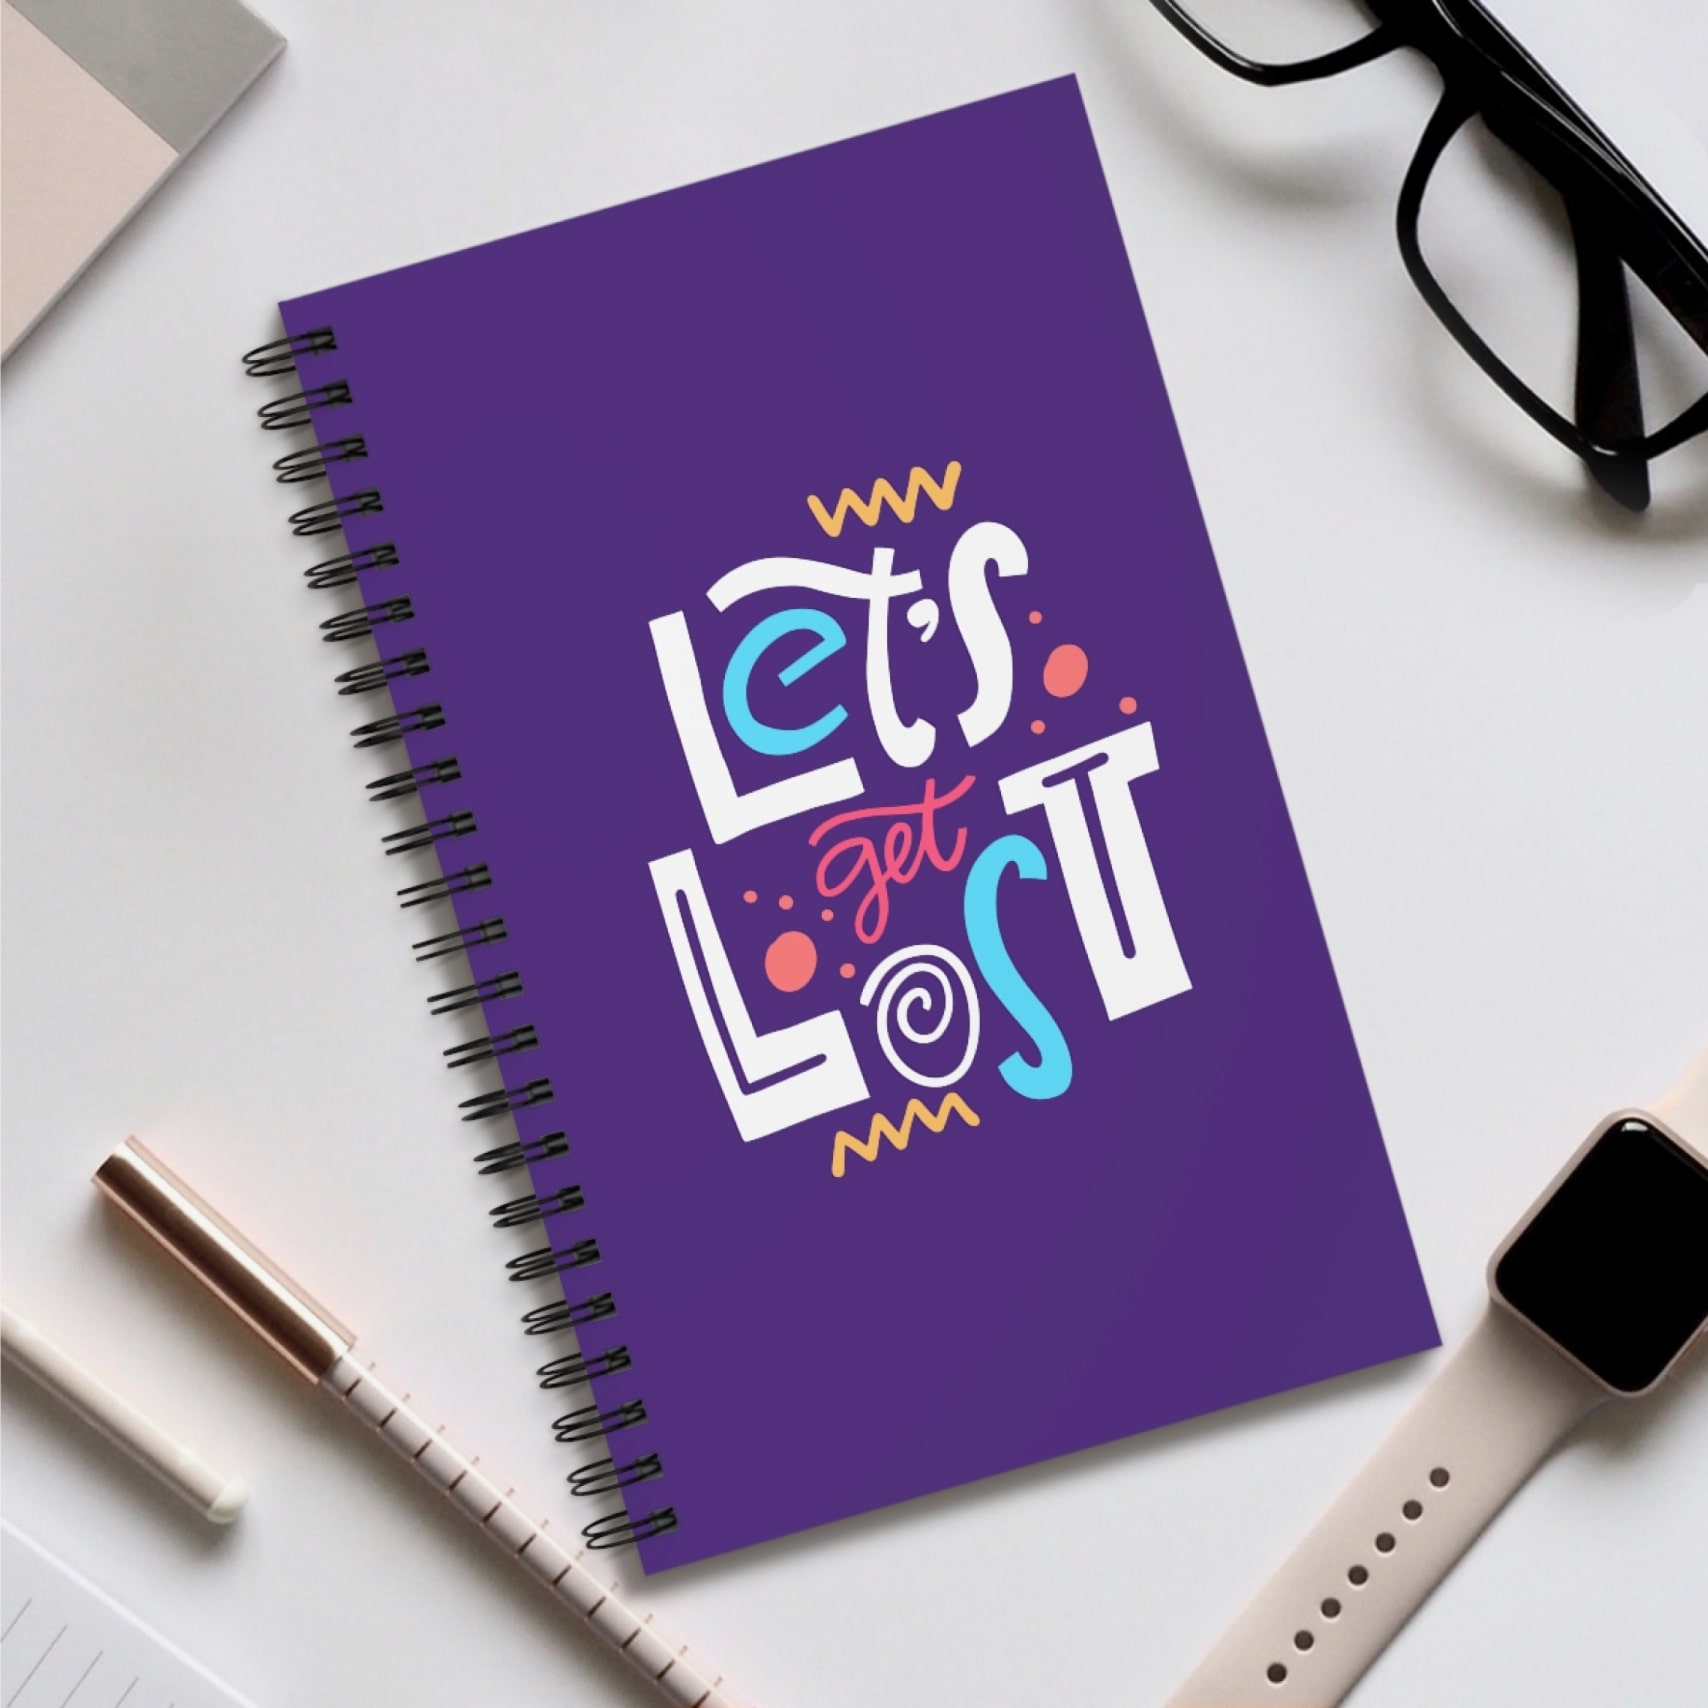 A purple spiral notebook with the text “Let’s Get Lost” printed on the front cover in colorful letters.